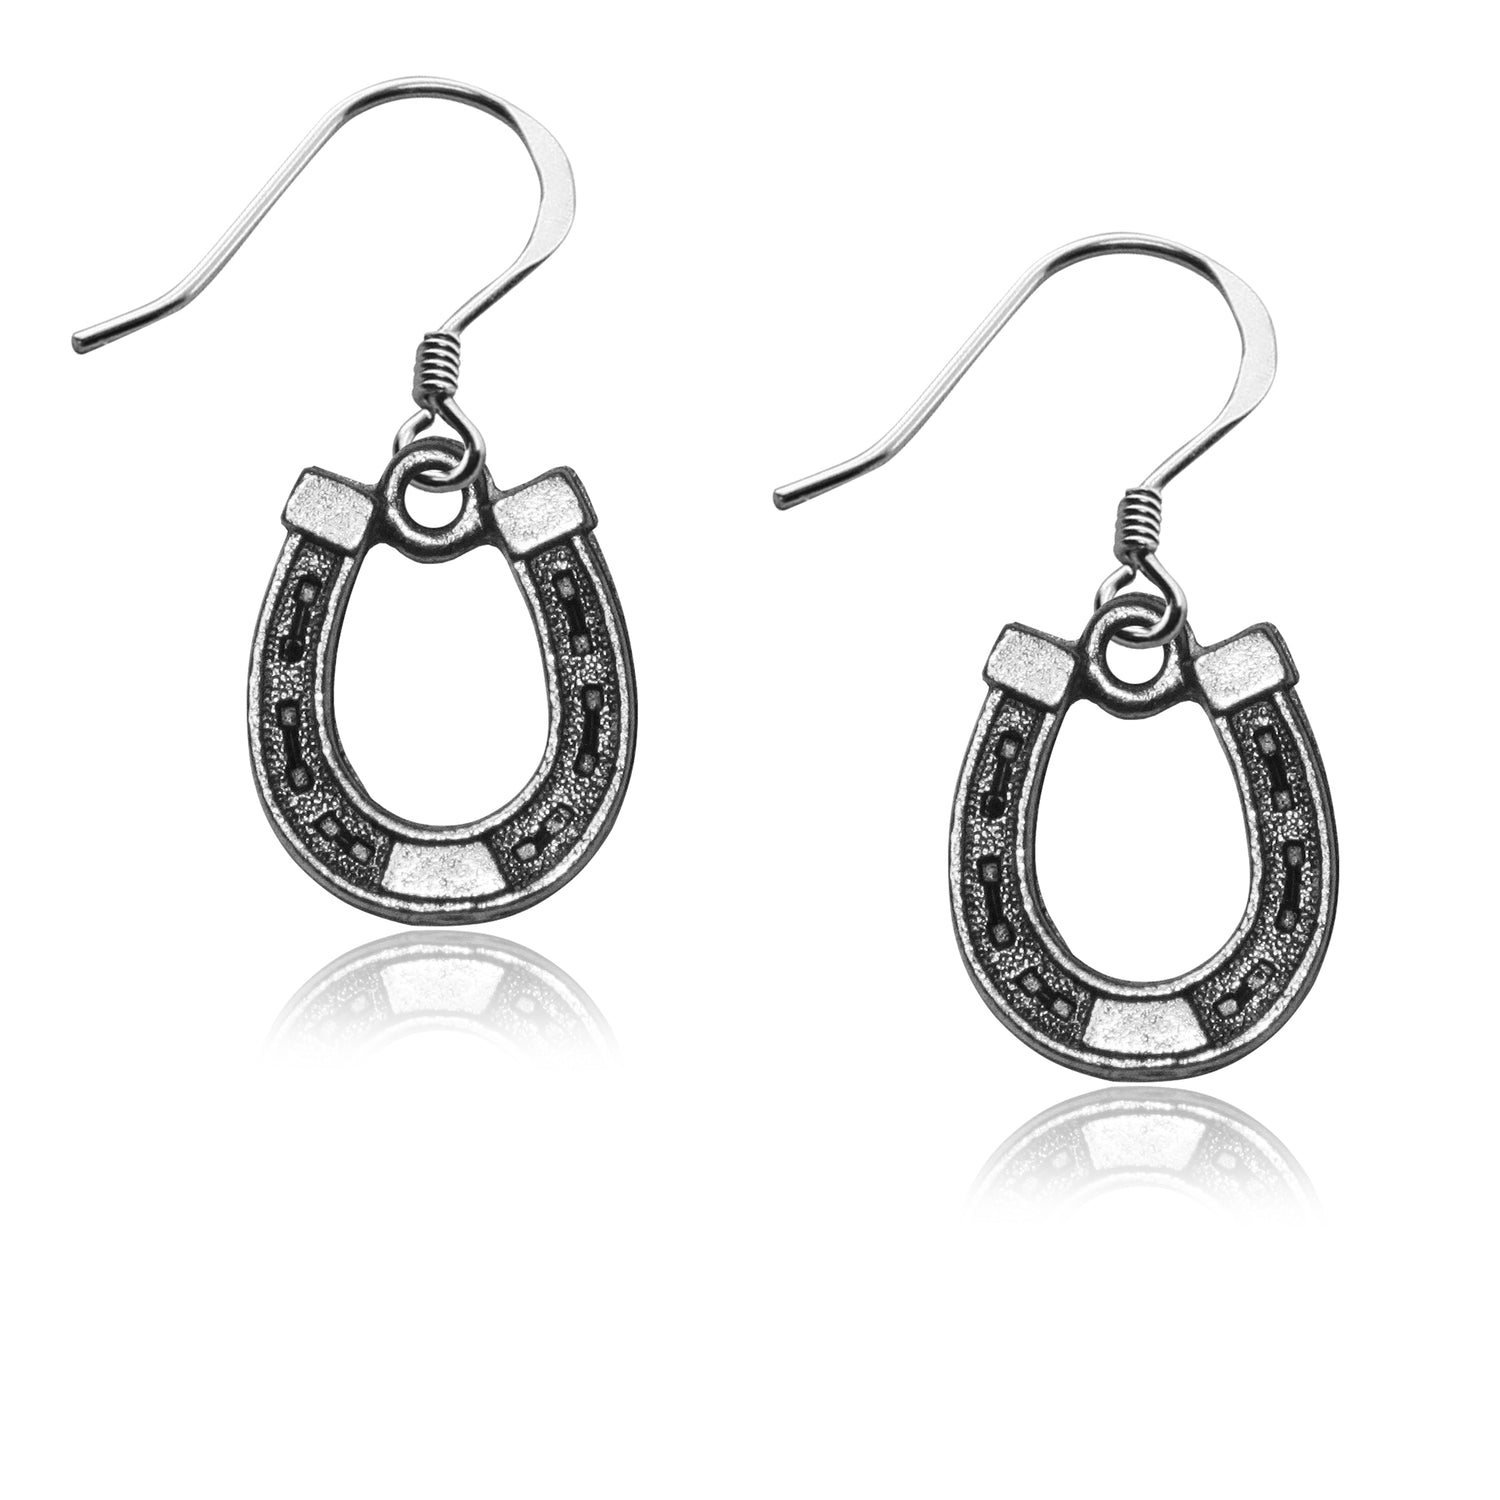 Whimsical Gifts | Horse Shoe Charm Earrings in Silver Finish | Animal Lover | Horse & Equestrian | Jewelry